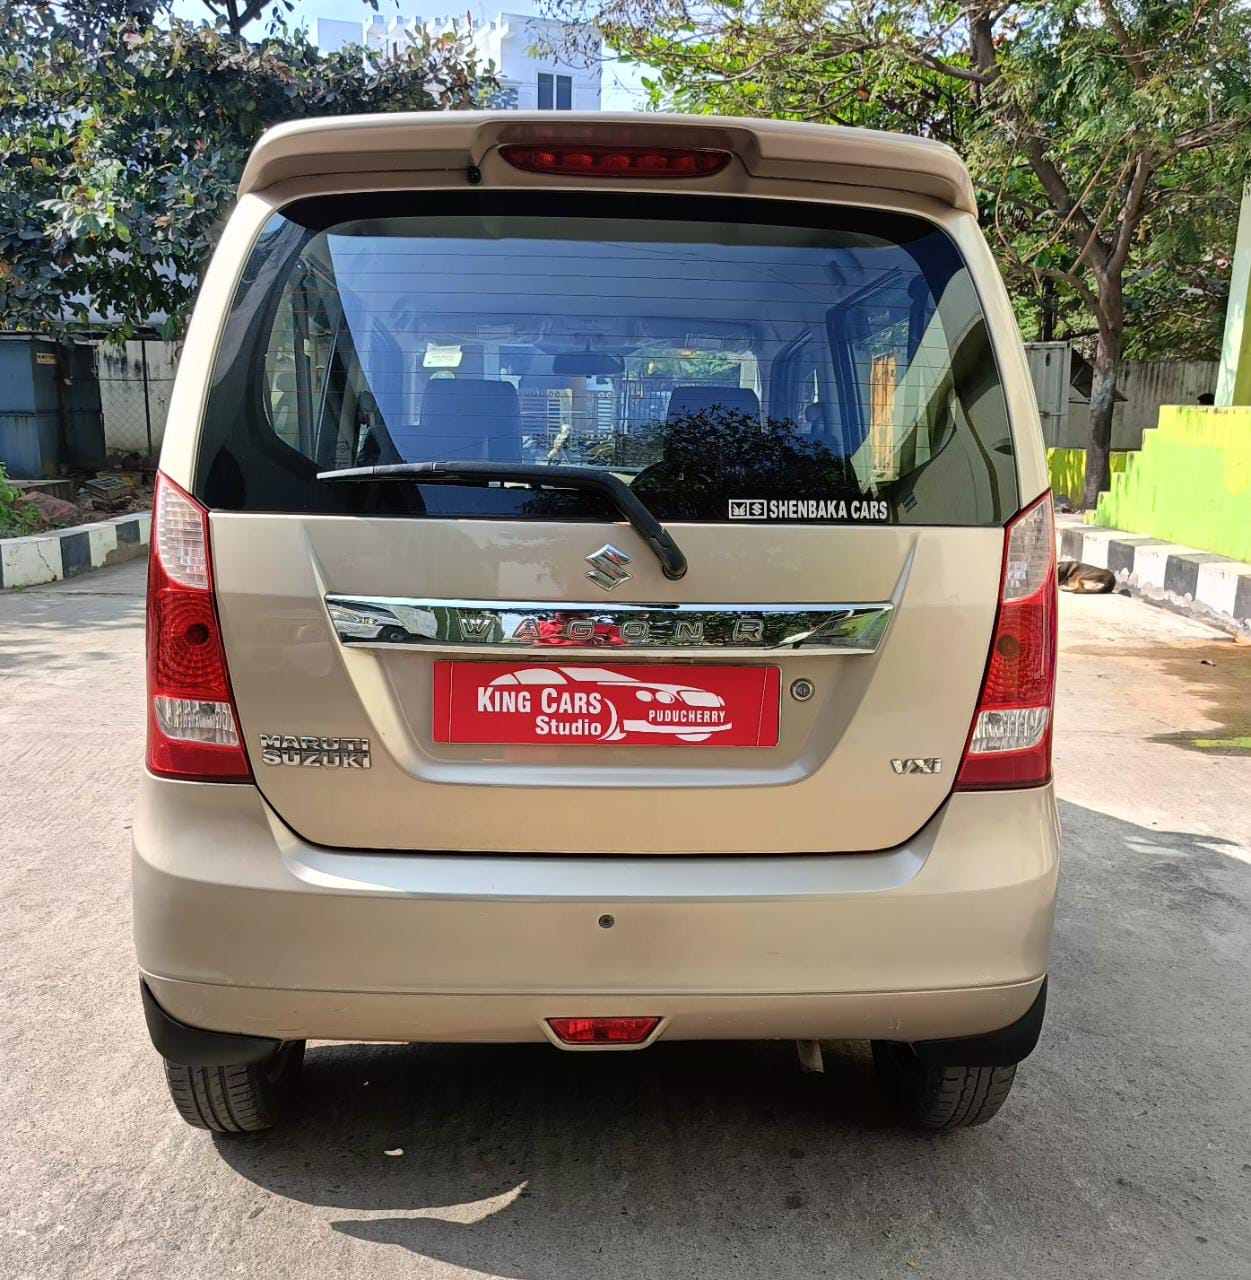 6094-for-sale-Maruthi-Suzuki-Wagon-R-1.0-Petrol-First-Owner-2016-PY-registered-rs-369999